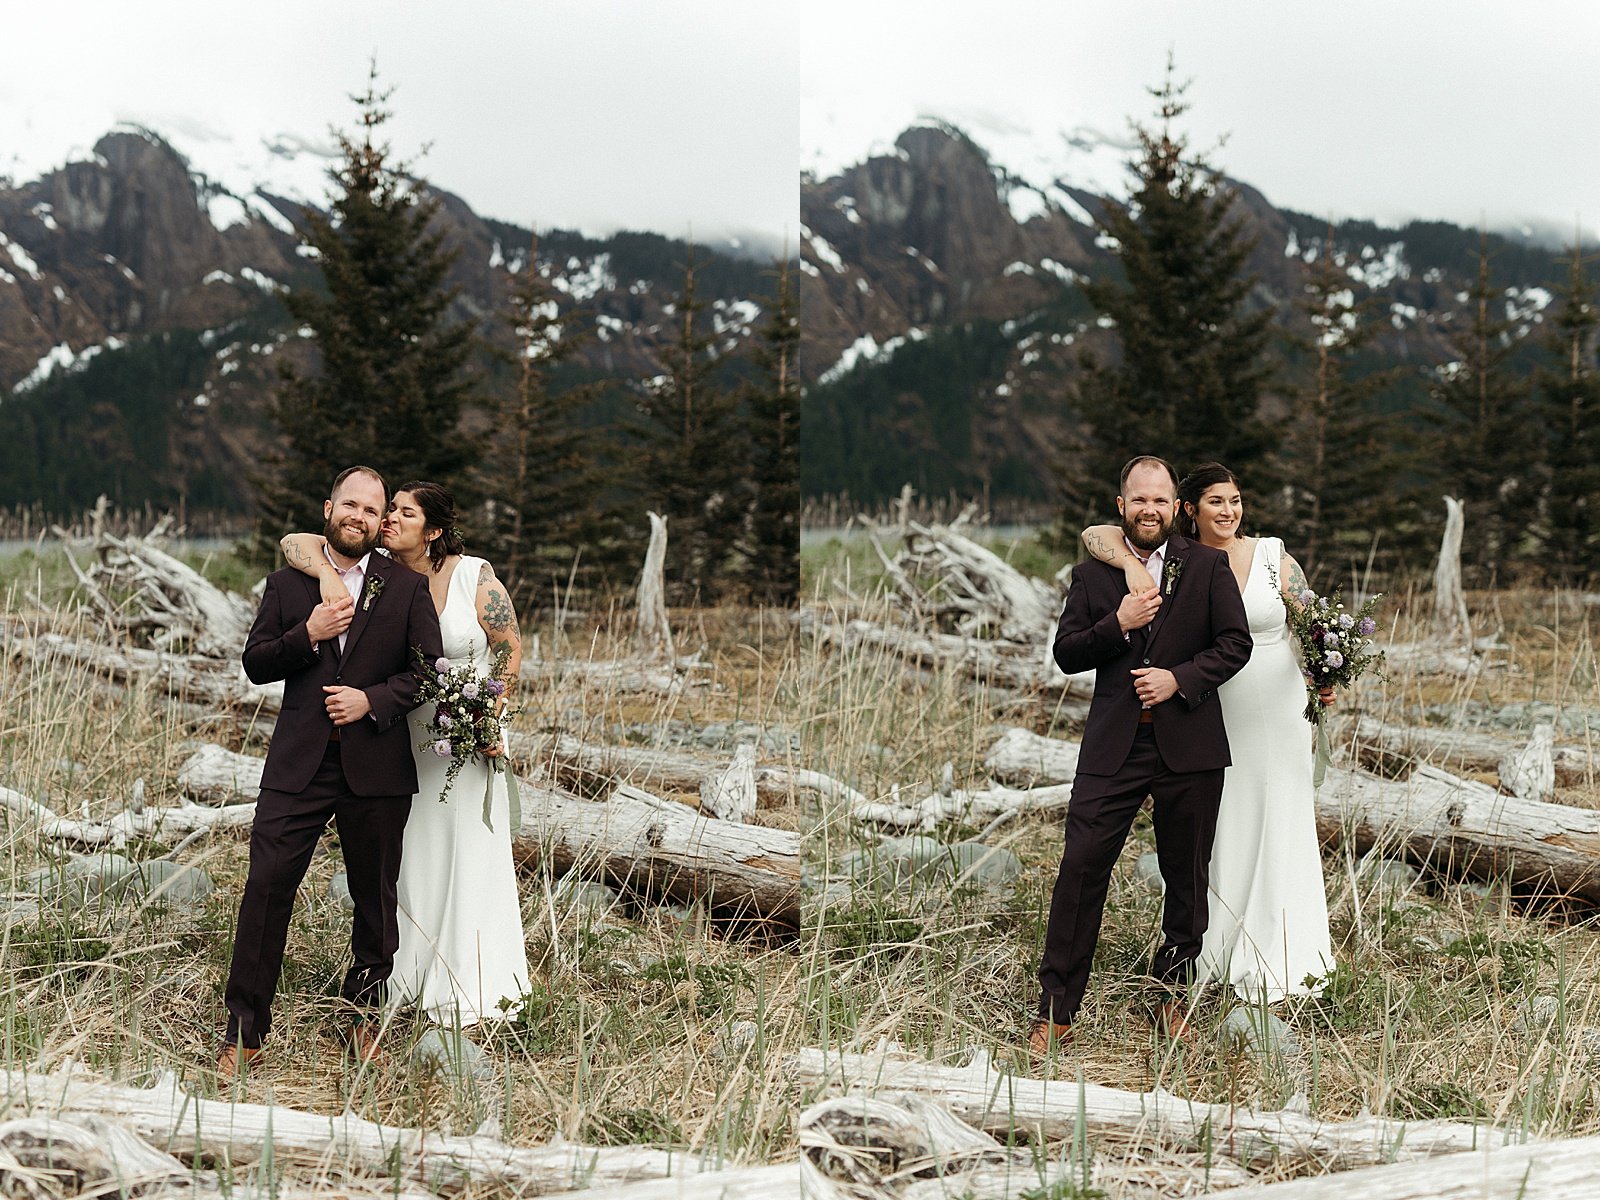  Newlyweds embracing in nature after their ceremony by an Alaska wedding photographer 